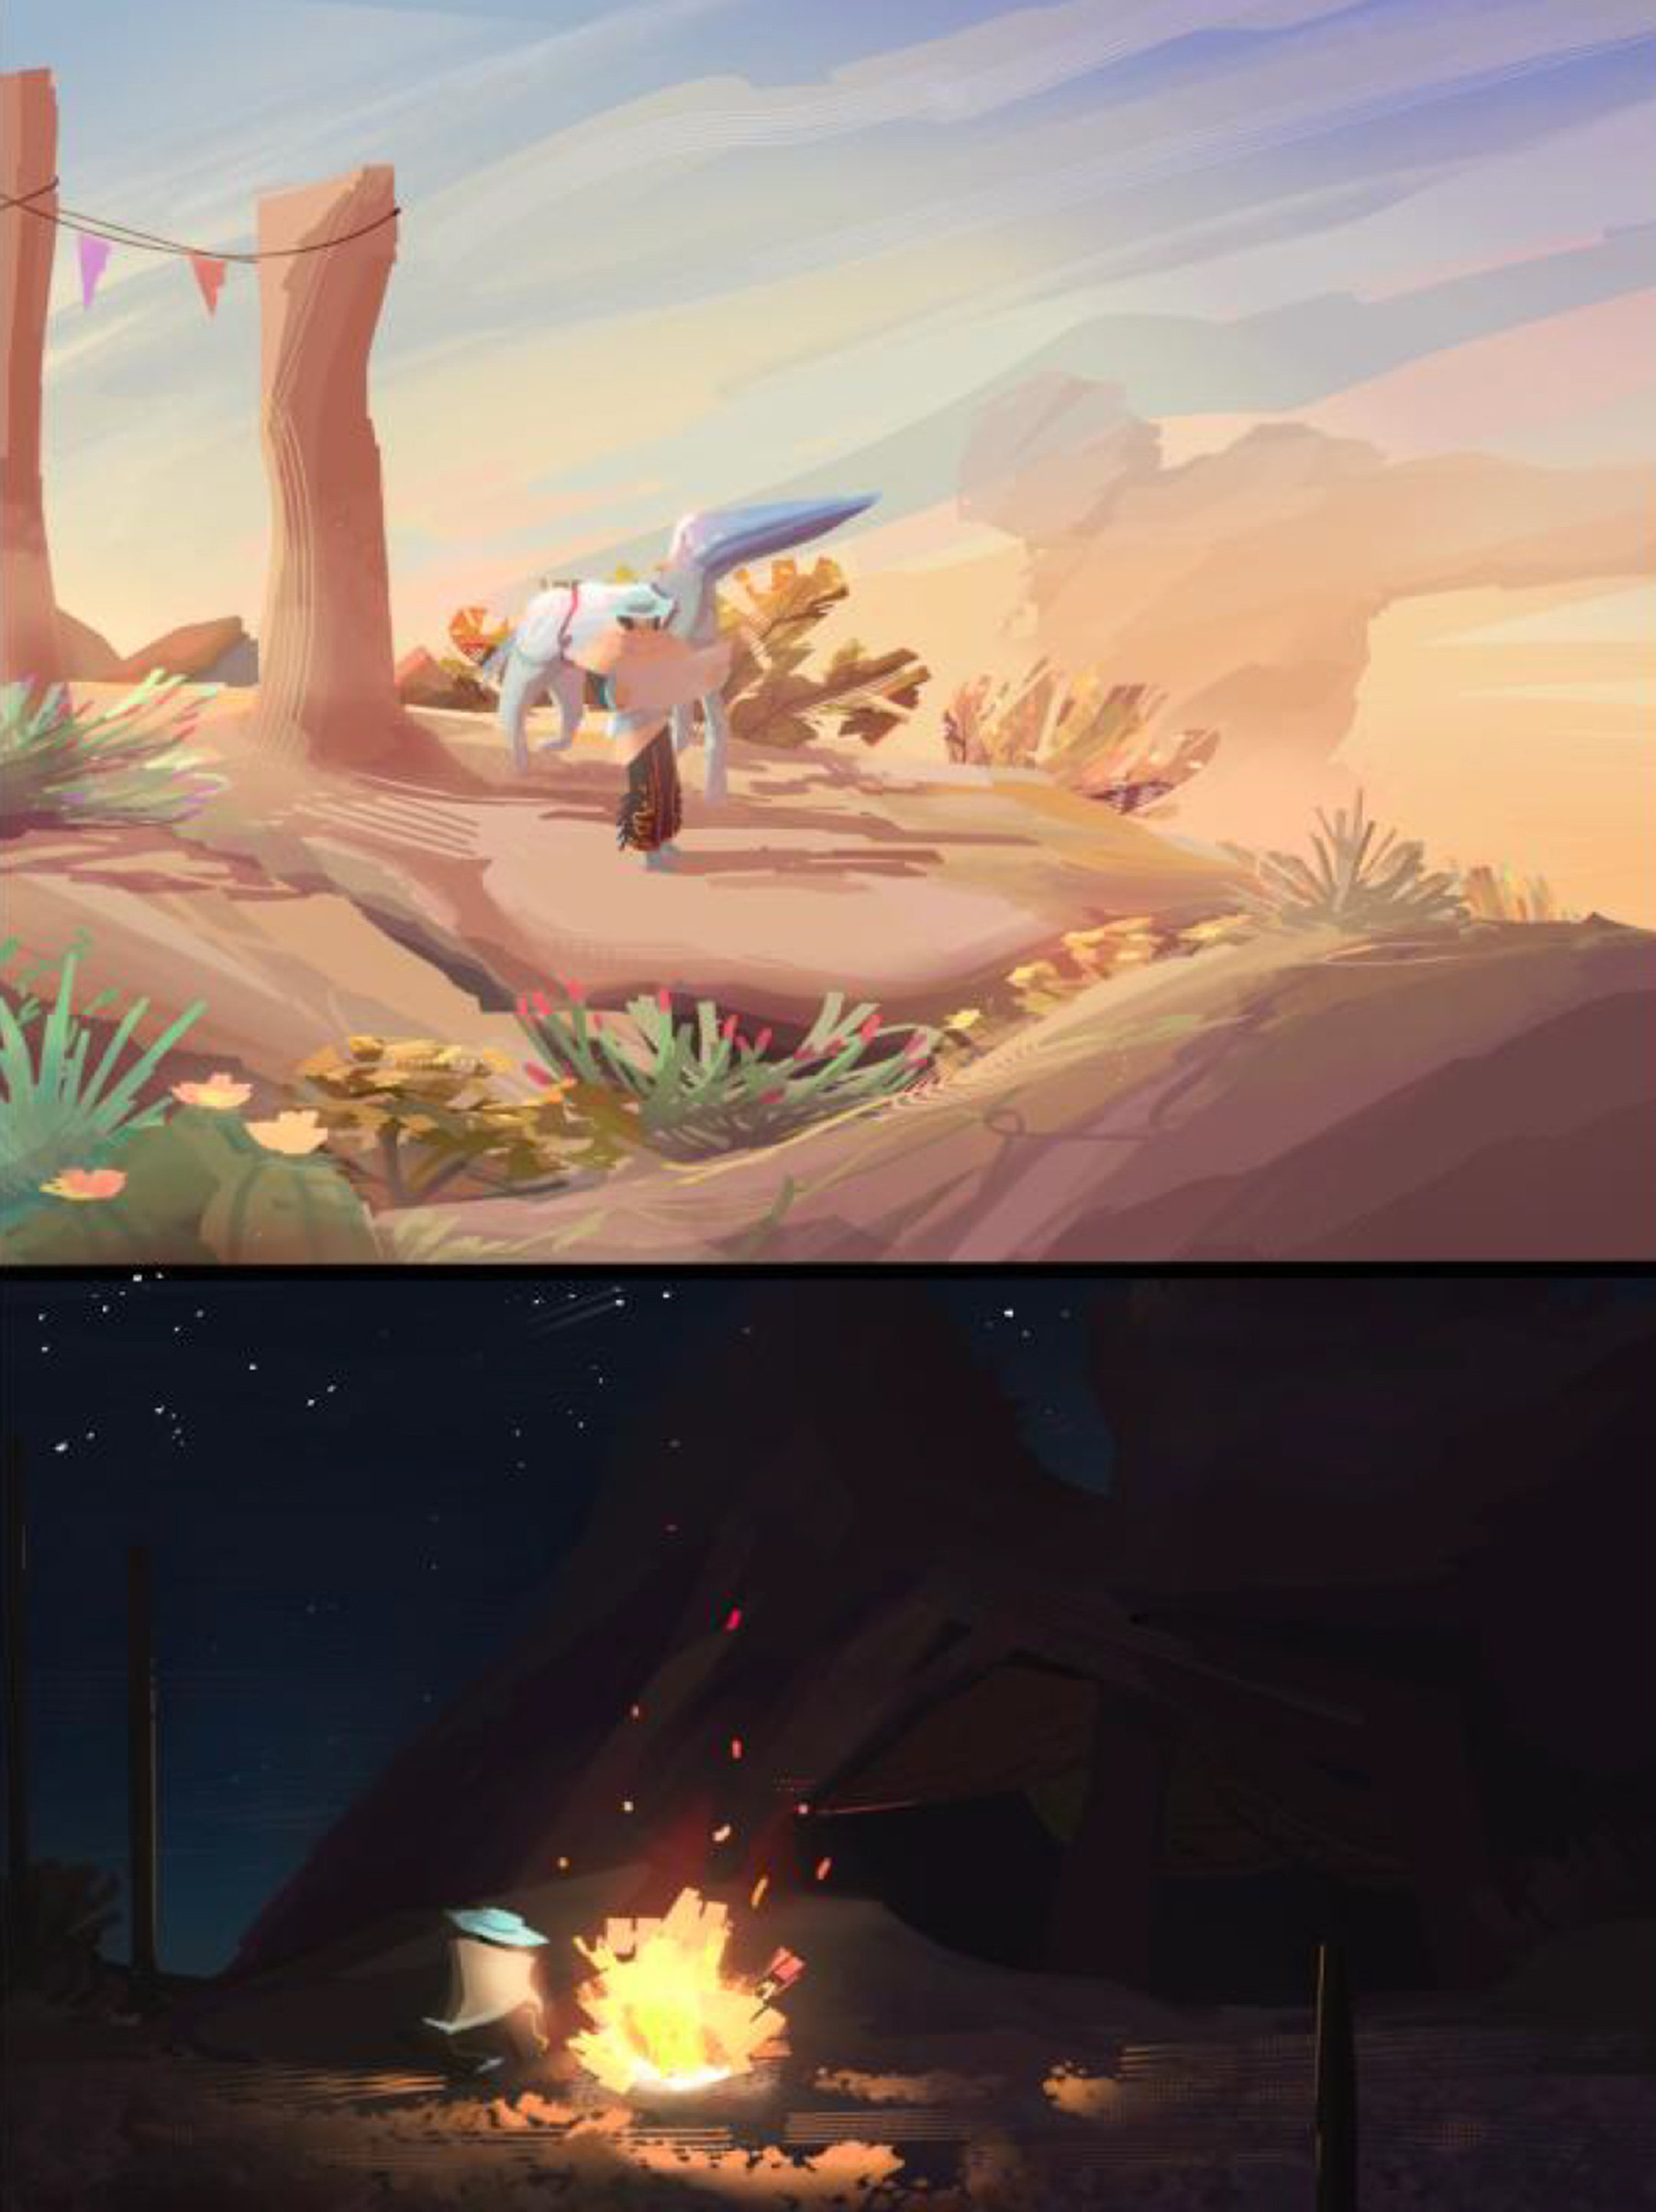 digital illustration depicting two scenes, on top a western desert and an encampment in the day, and at bottom a western desert at night with a campfire